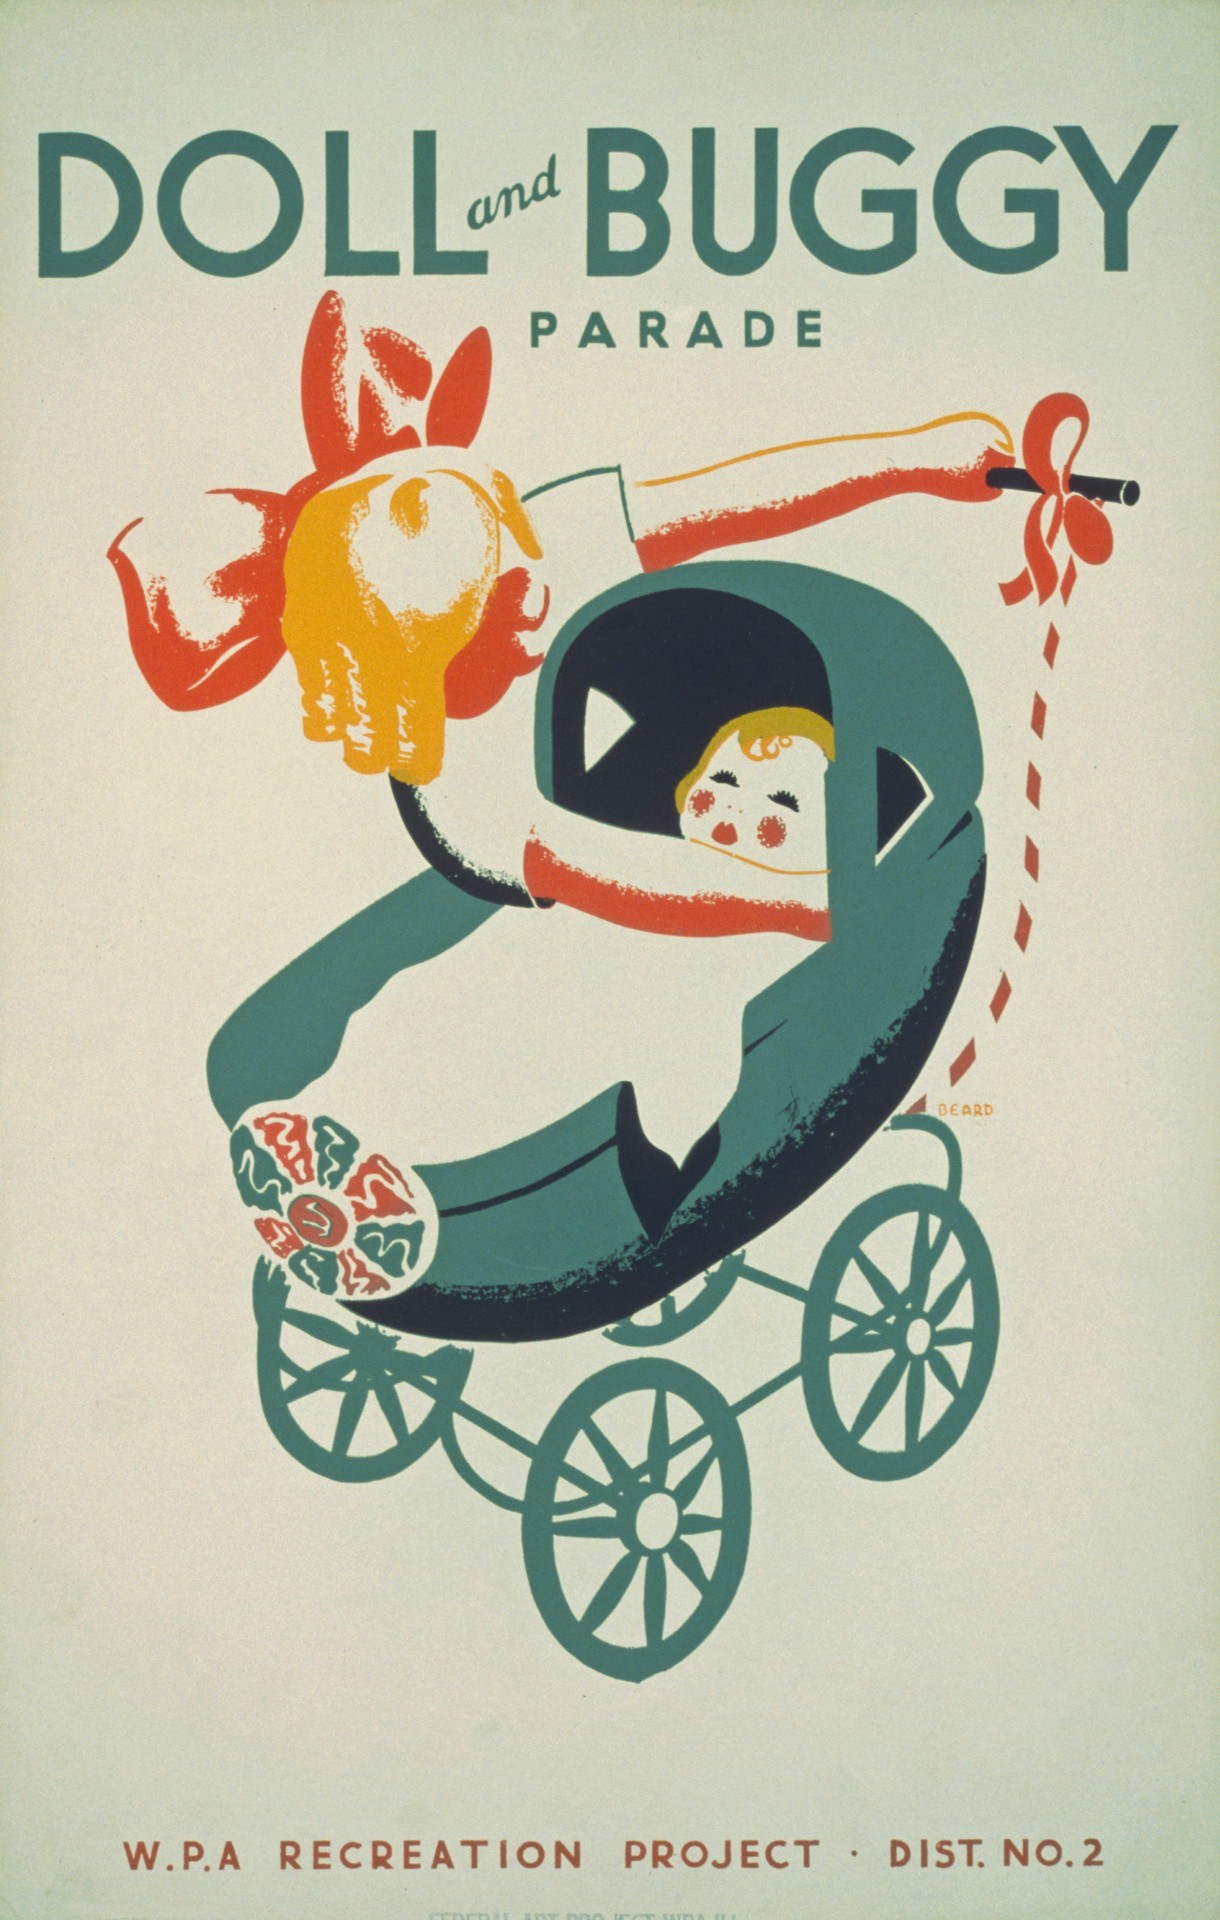 Vintage Doll & Buggy Parade Poster